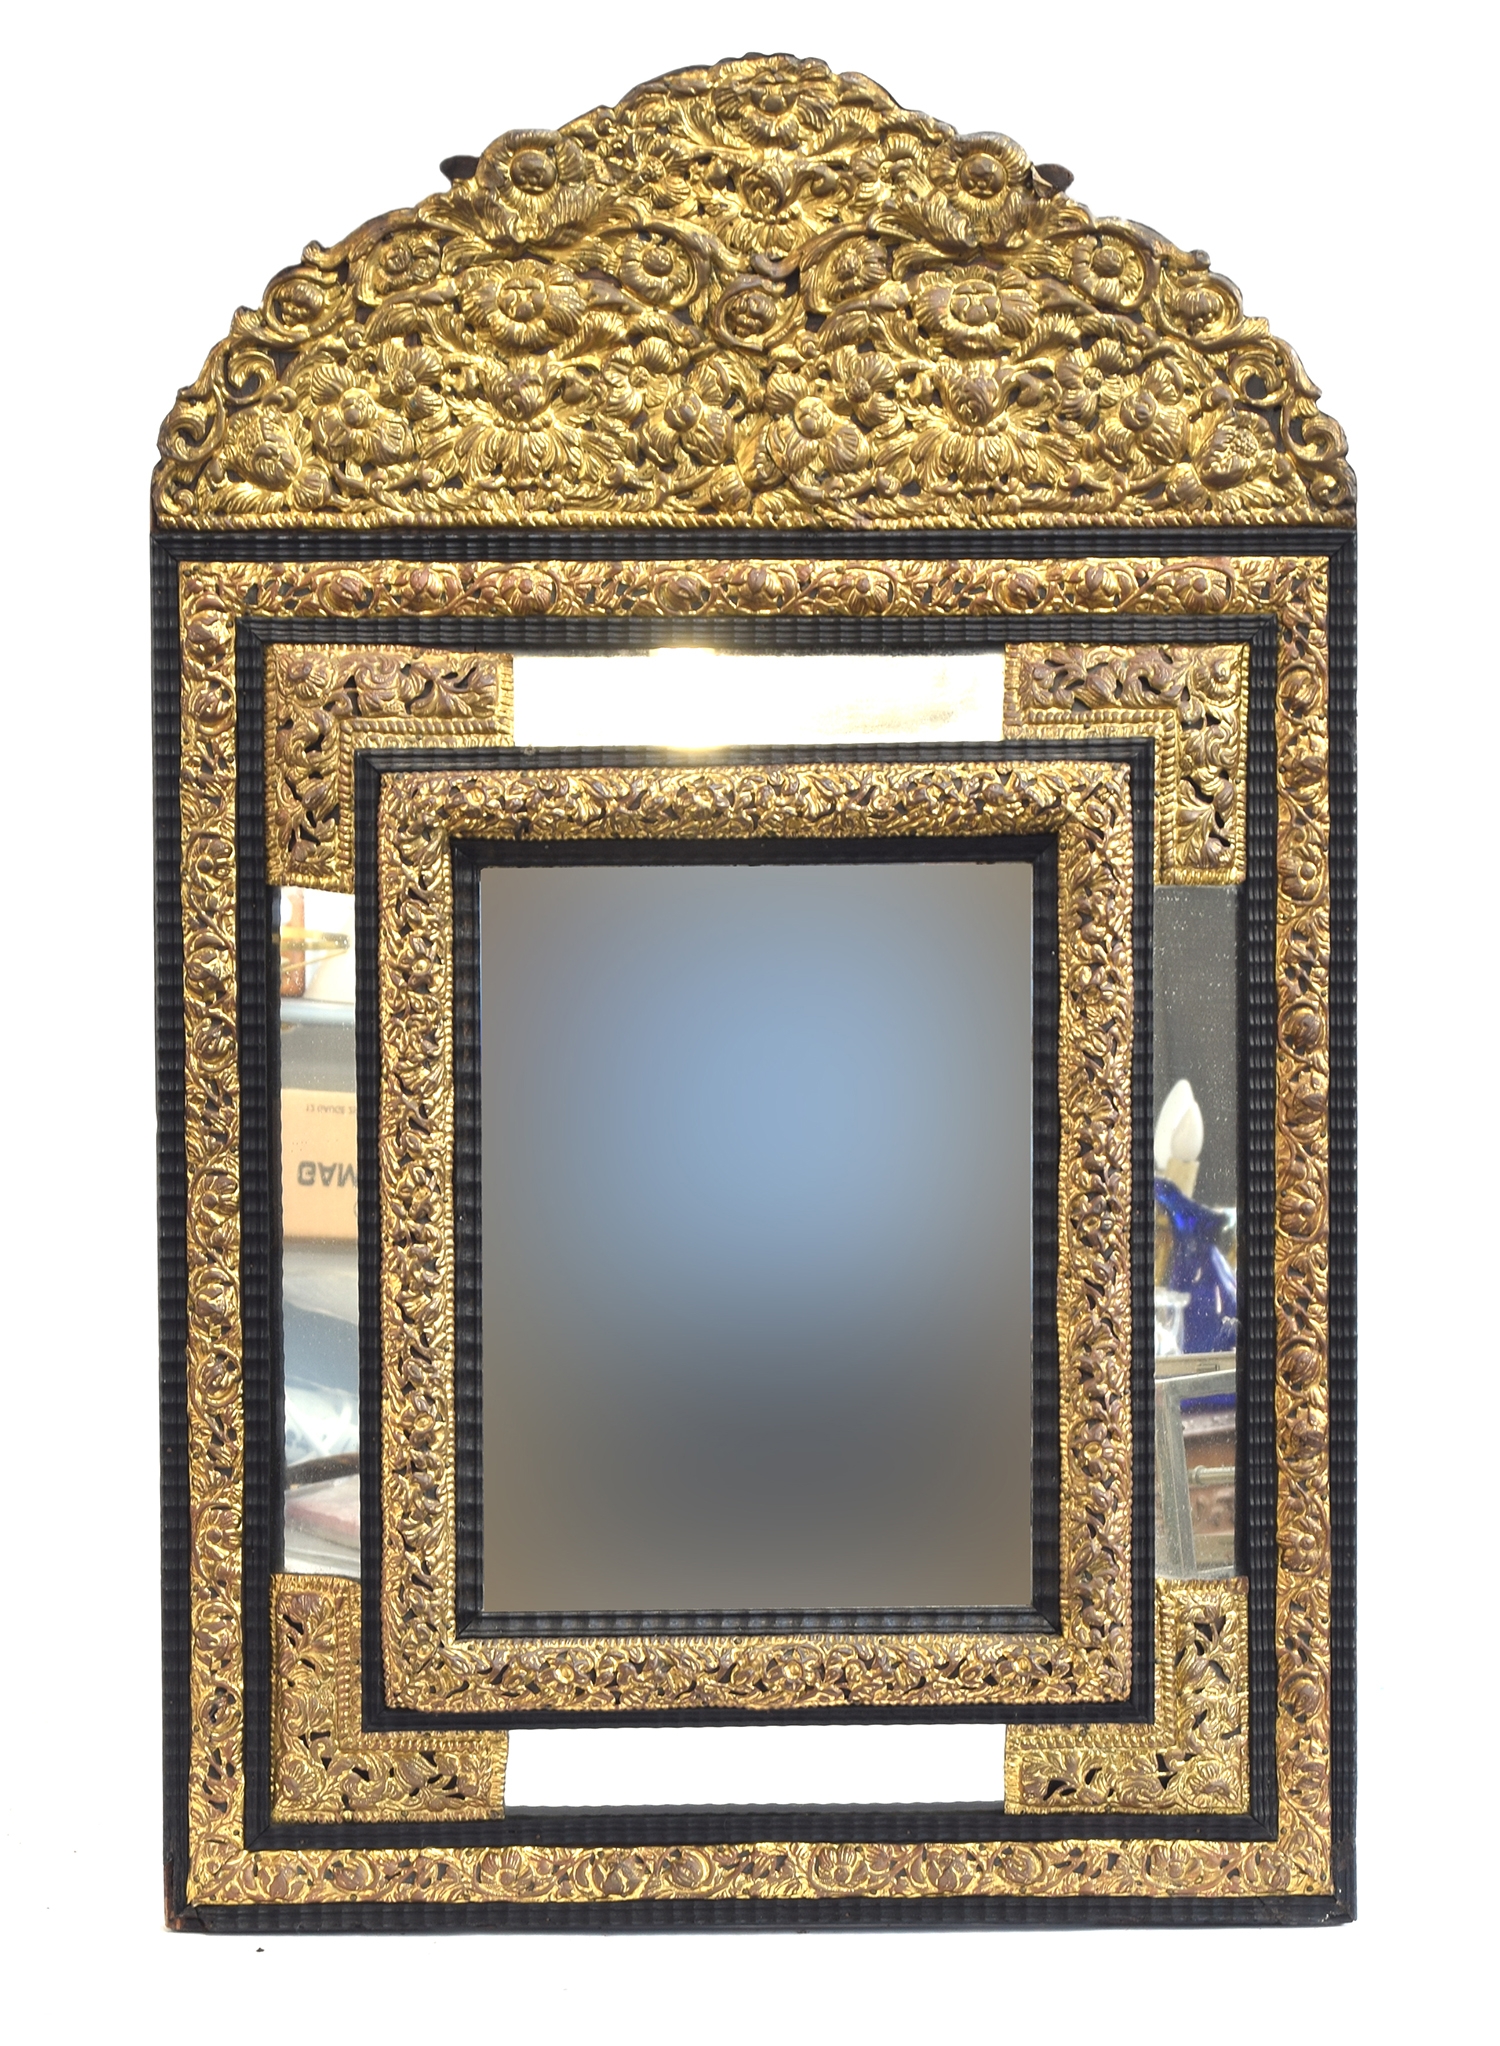 A 19th century French worked metal and ebonised wall mirror, c.1900, in baroque style, the central